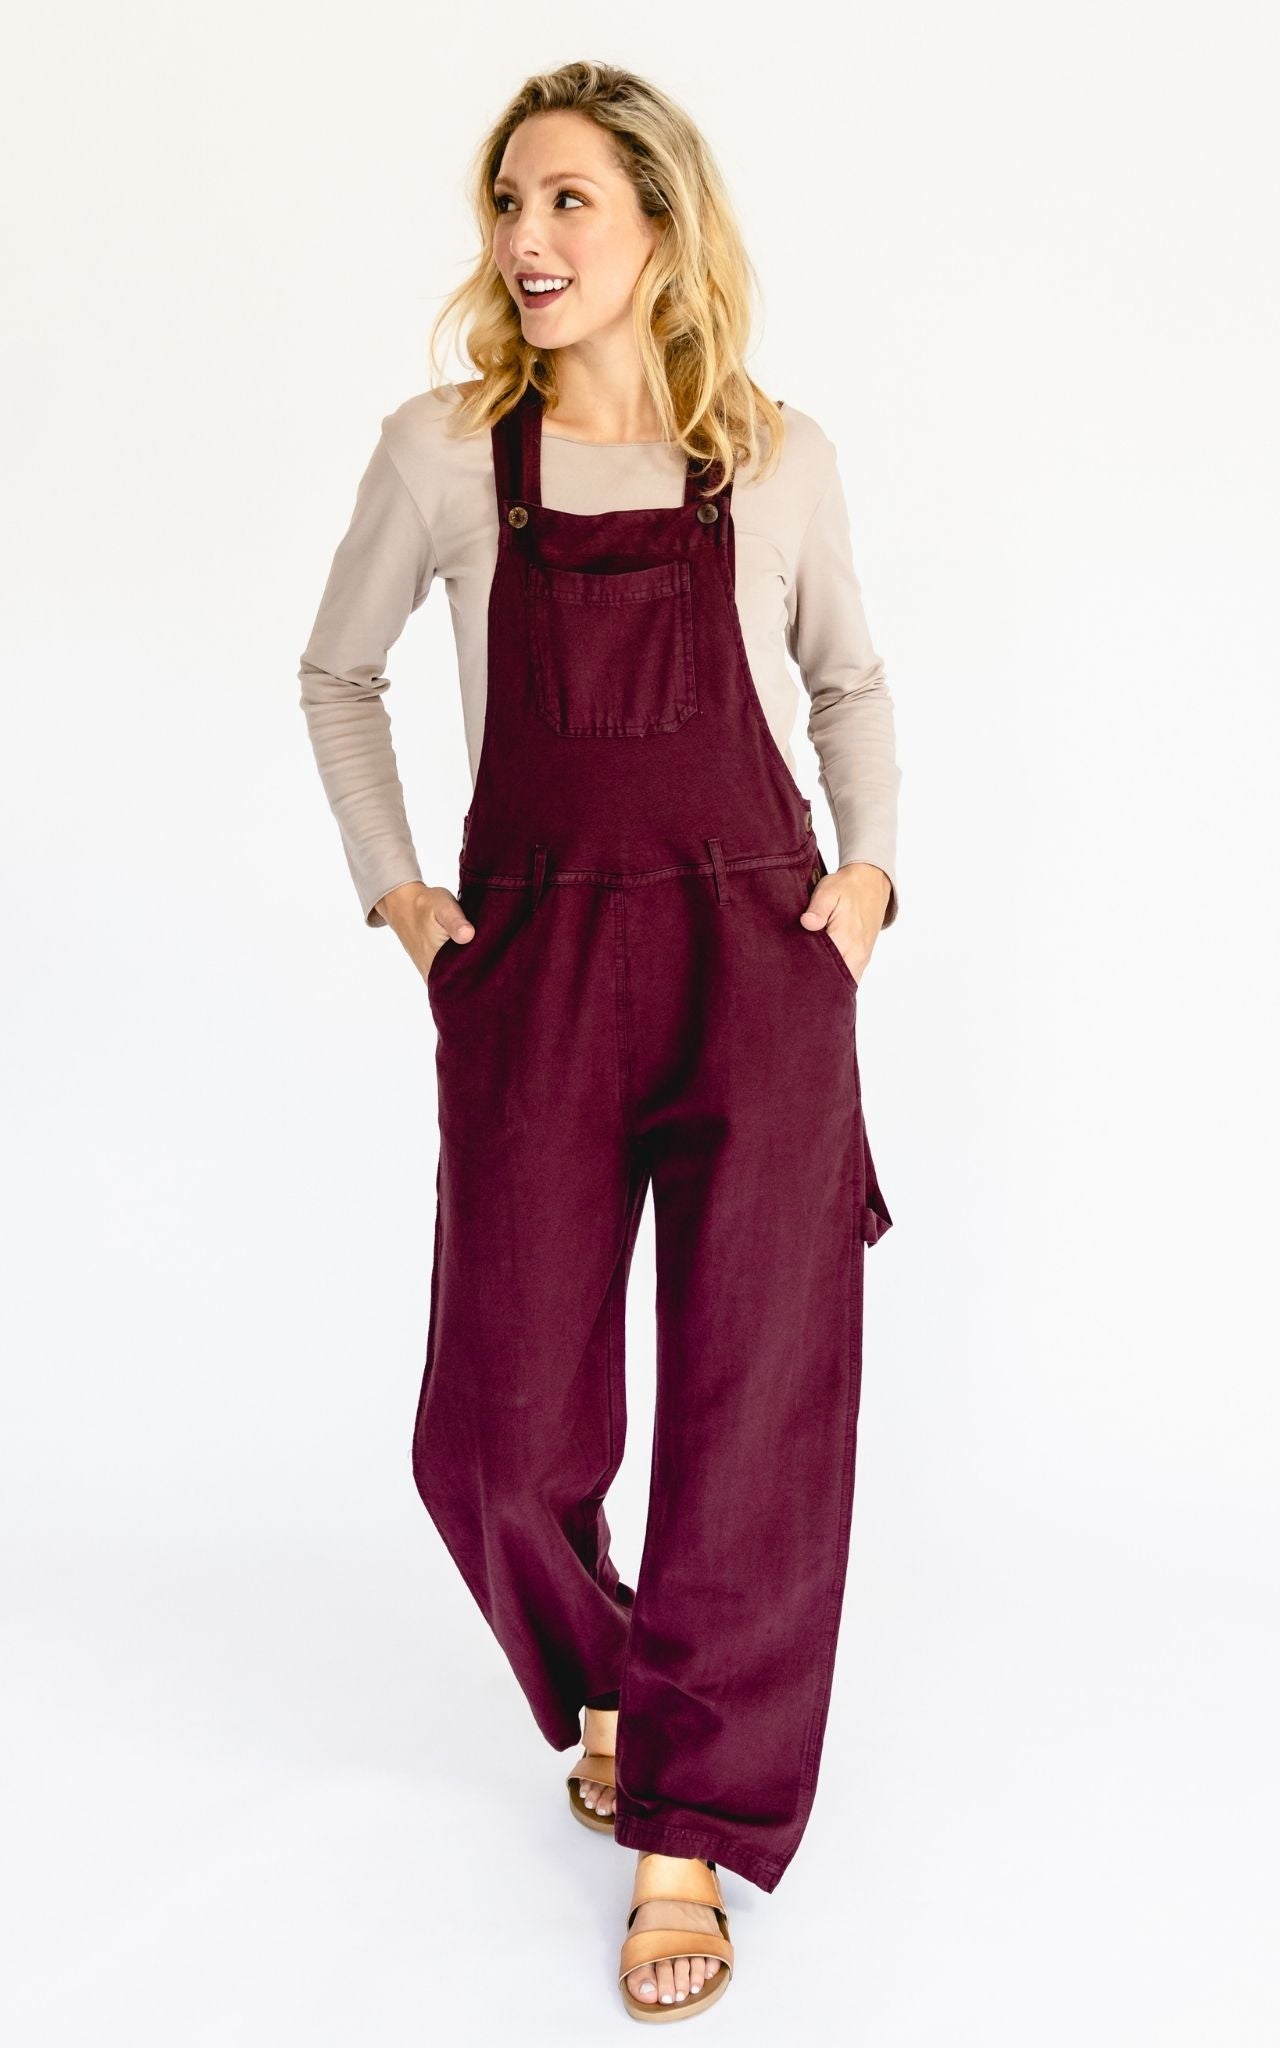 Surya Australia Ethical Cotton Straight Leg Overalls (Dungarees) made in Nepal 